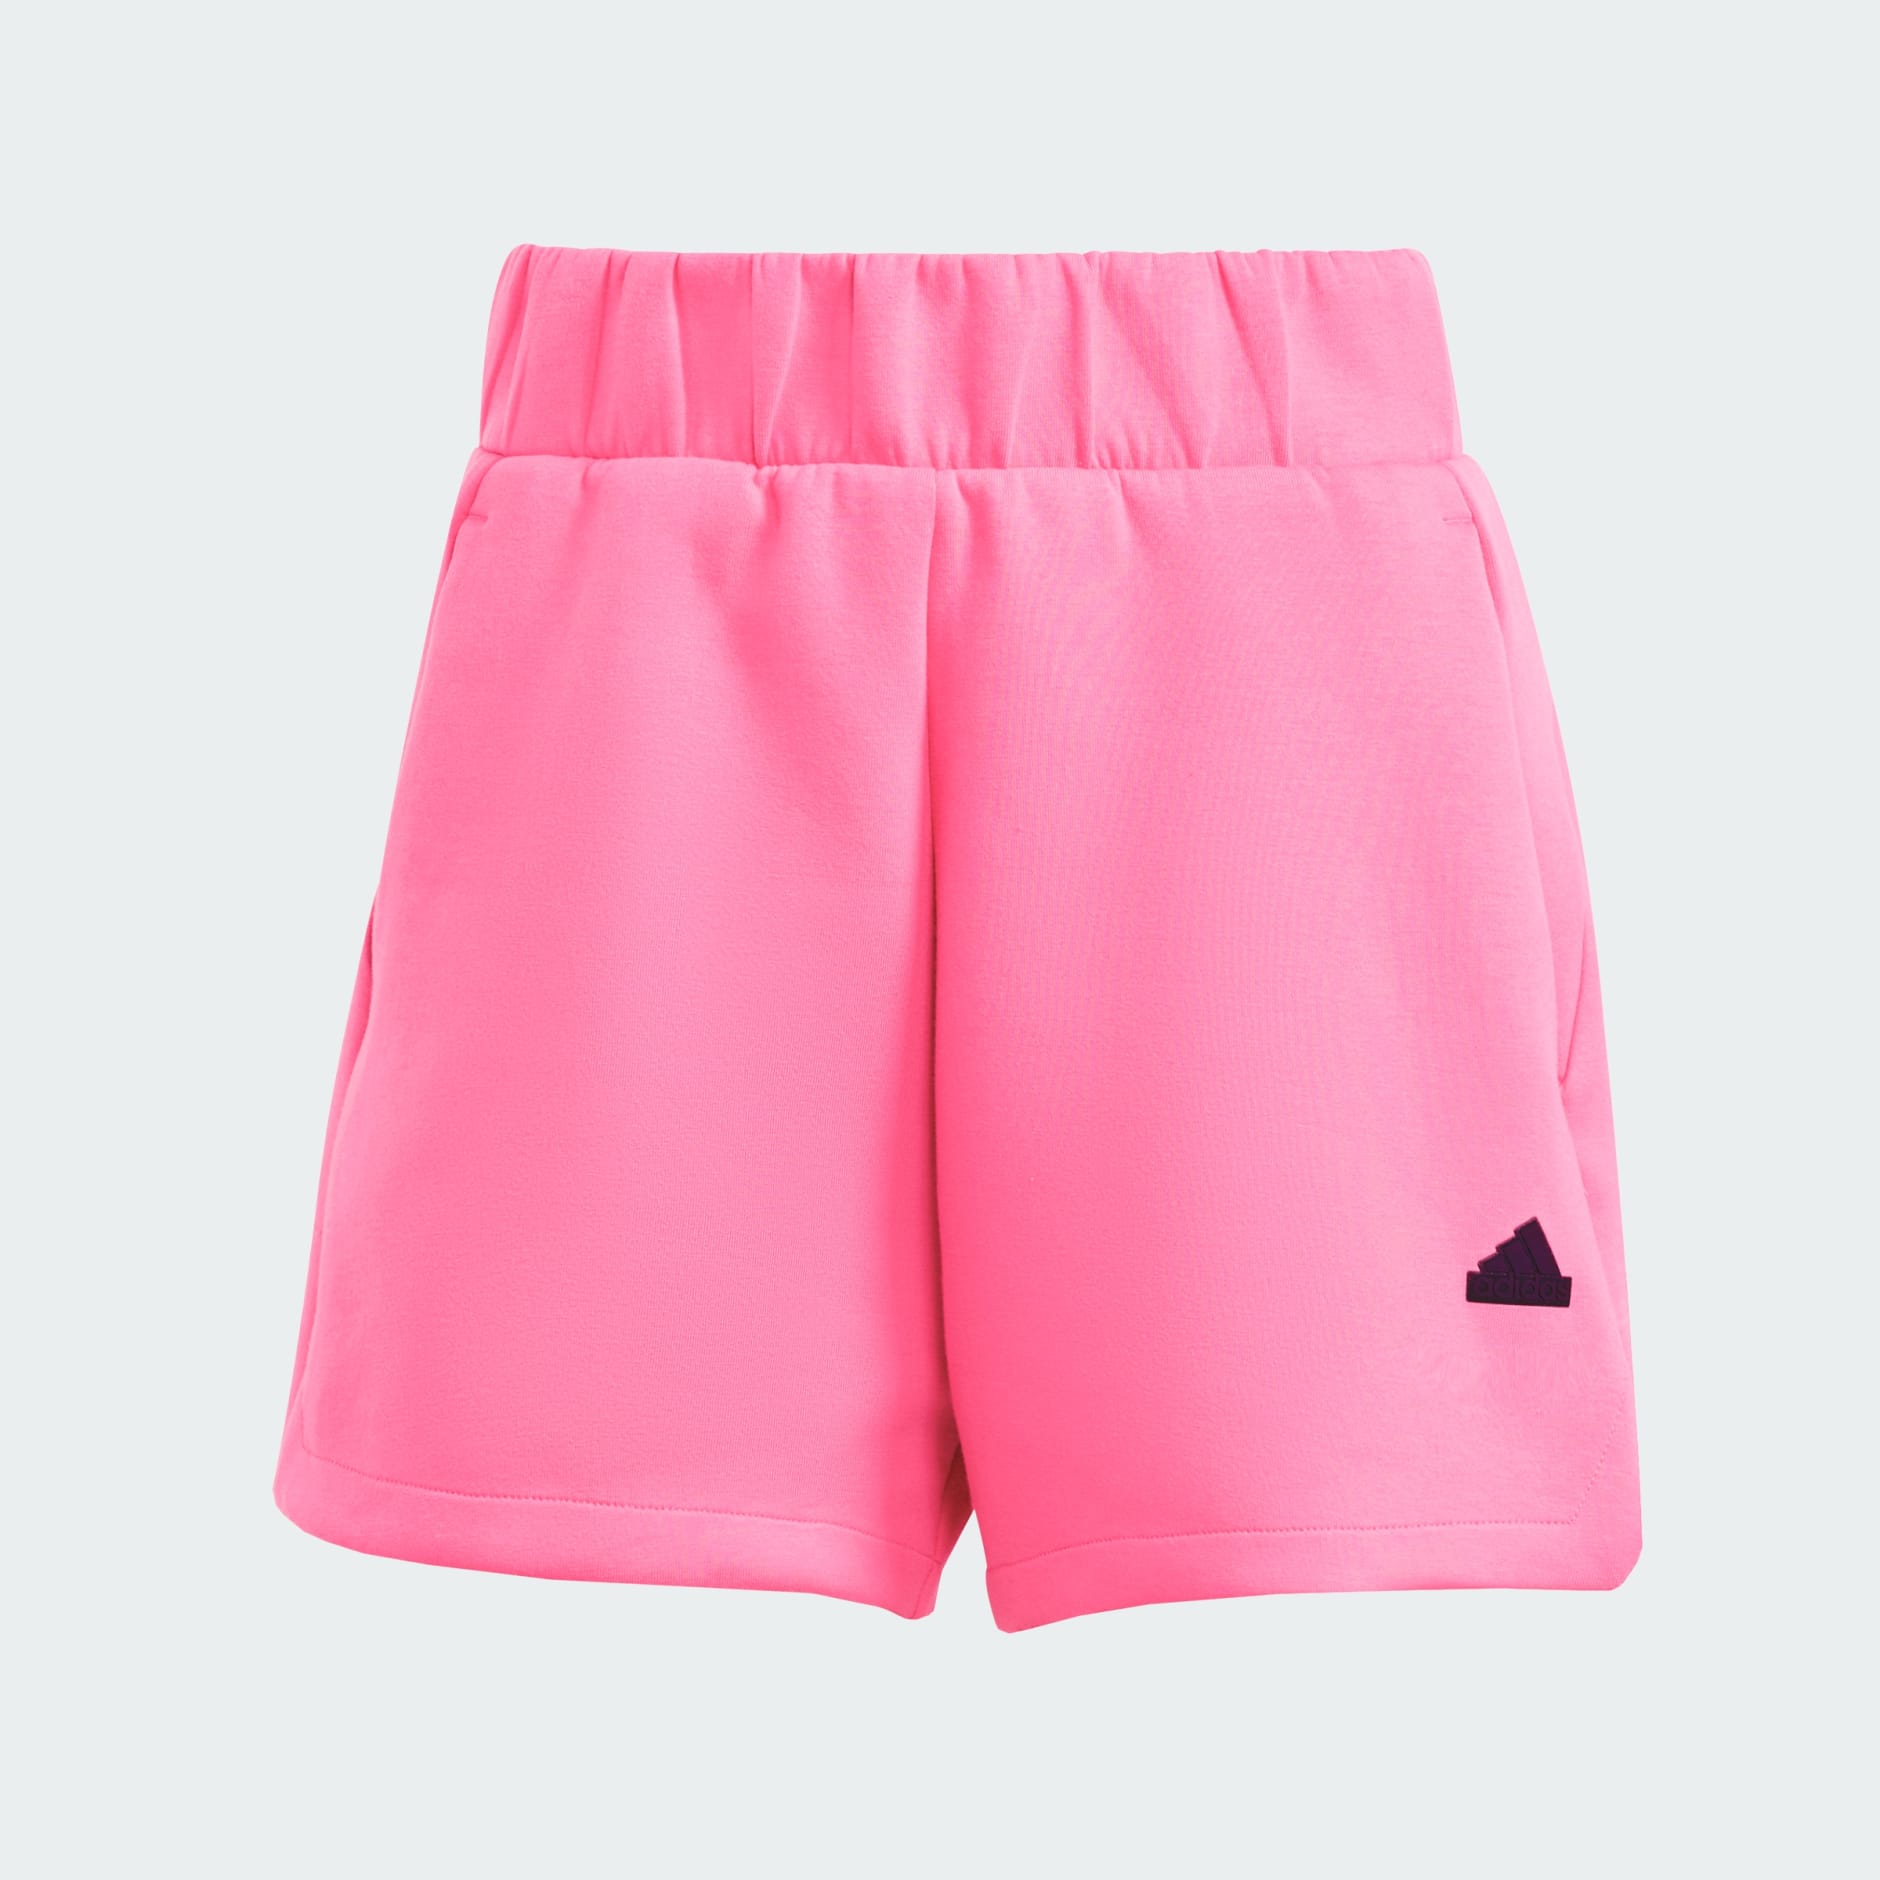 Clothing - Z.N.E. Shorts - Pink | adidas South Africa